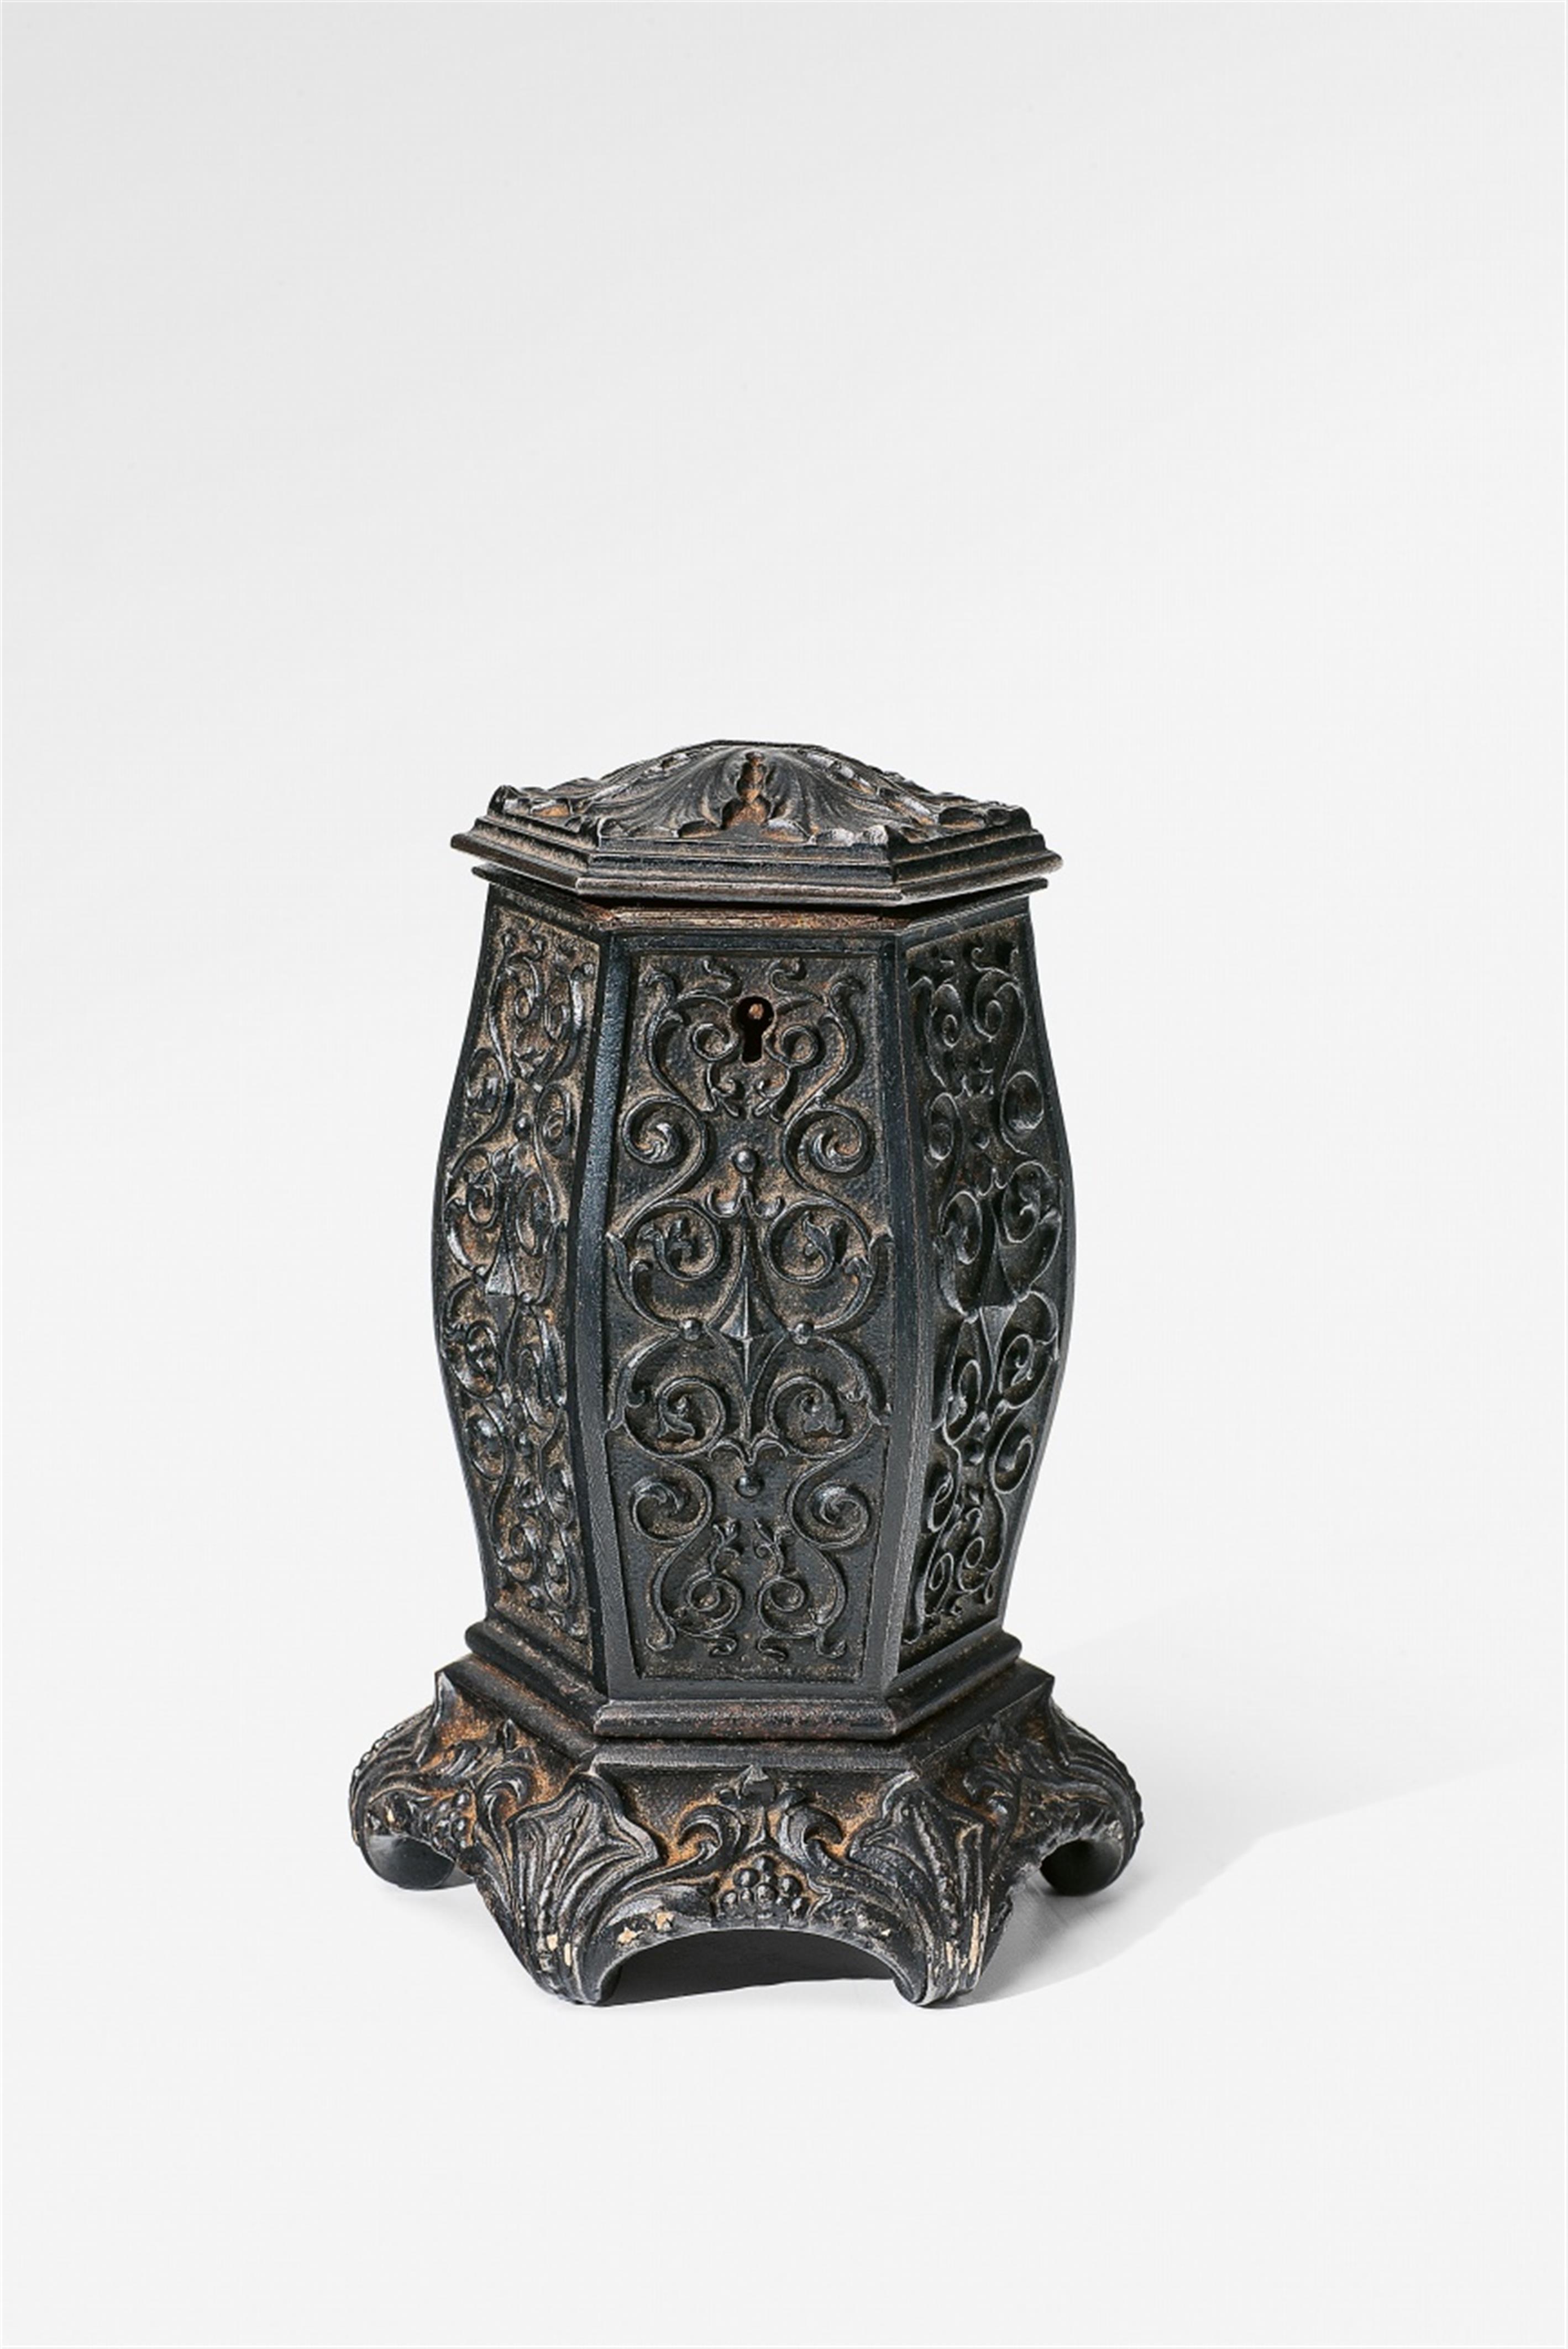 A Prussian cast iron moneybox - image-1